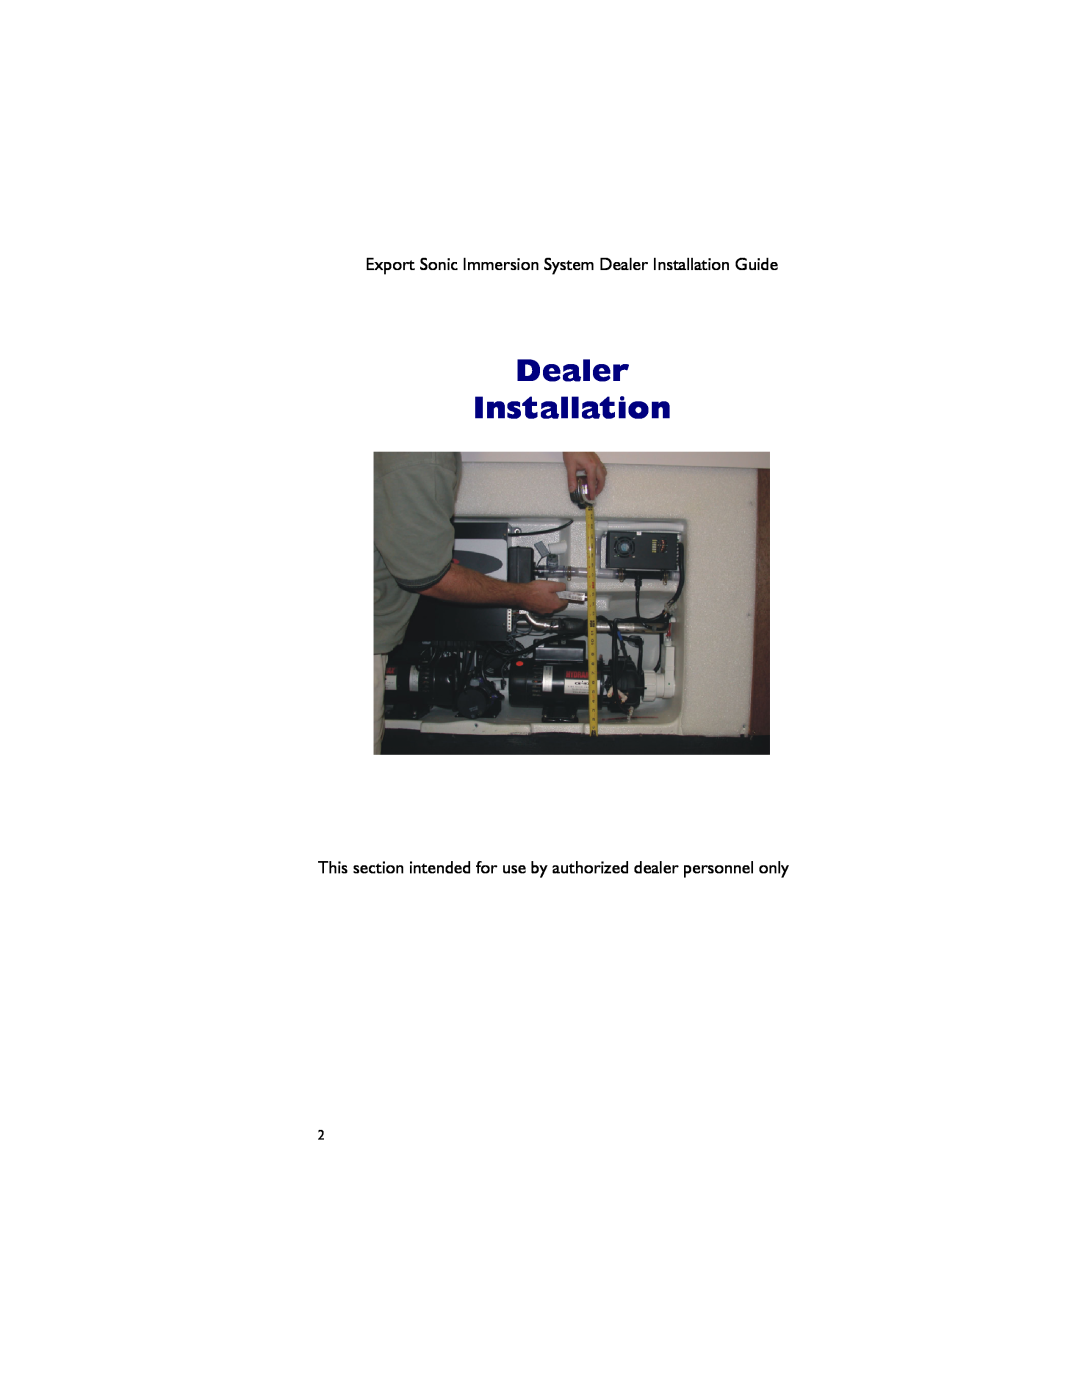 Dimension One Spas 01510-1030E Rev A manual Export Sonic Immersion System Dealer Installation Guide 